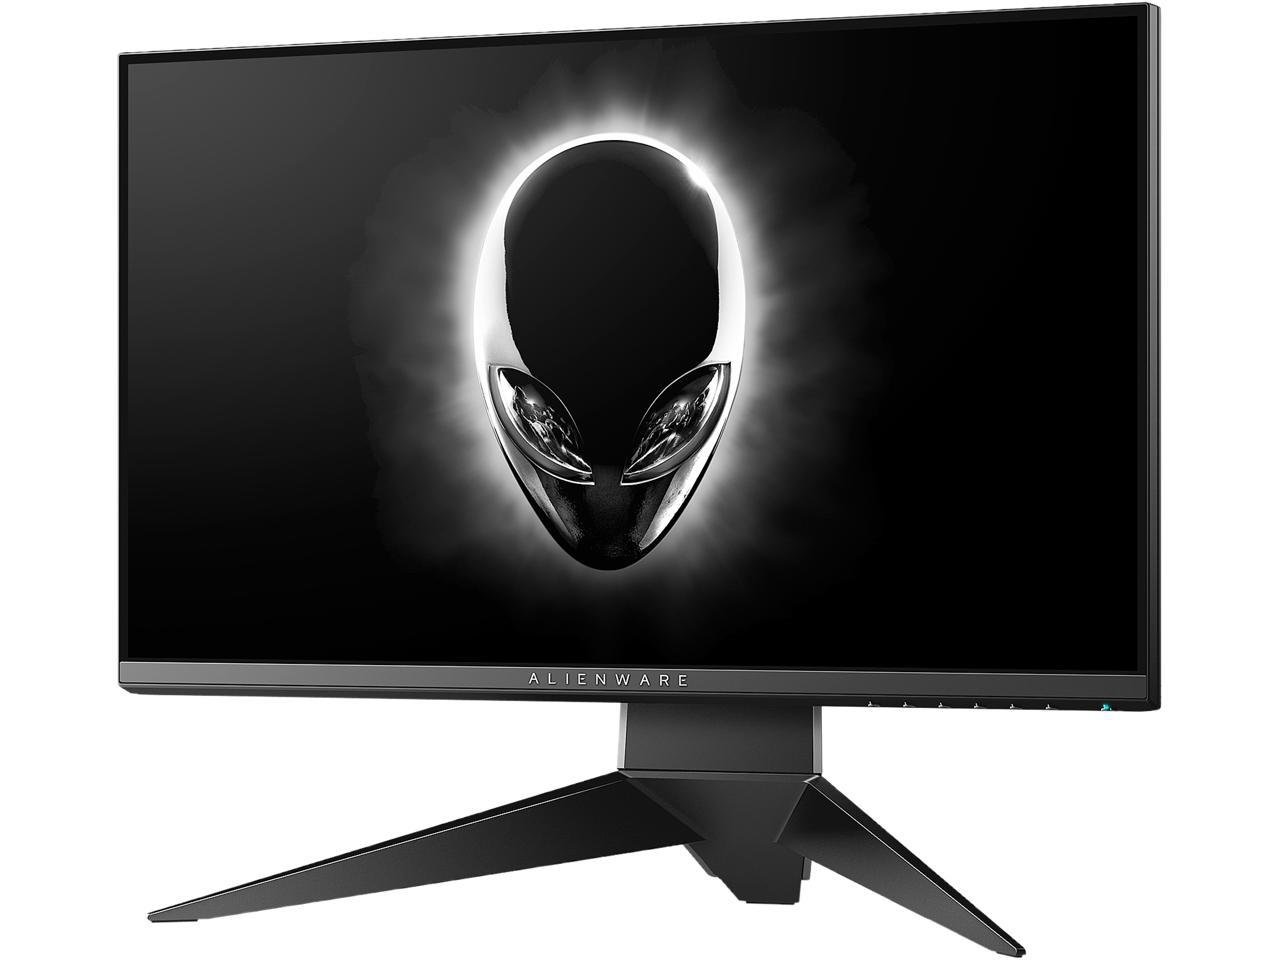 Alienware Aw2518h 25 Nvidia G Sync Gaming Monitor Alienfx 1ms Response Time 240hz Refresh Rate Displayport Hdmi 4 X Usb 3 0 Newegg Com